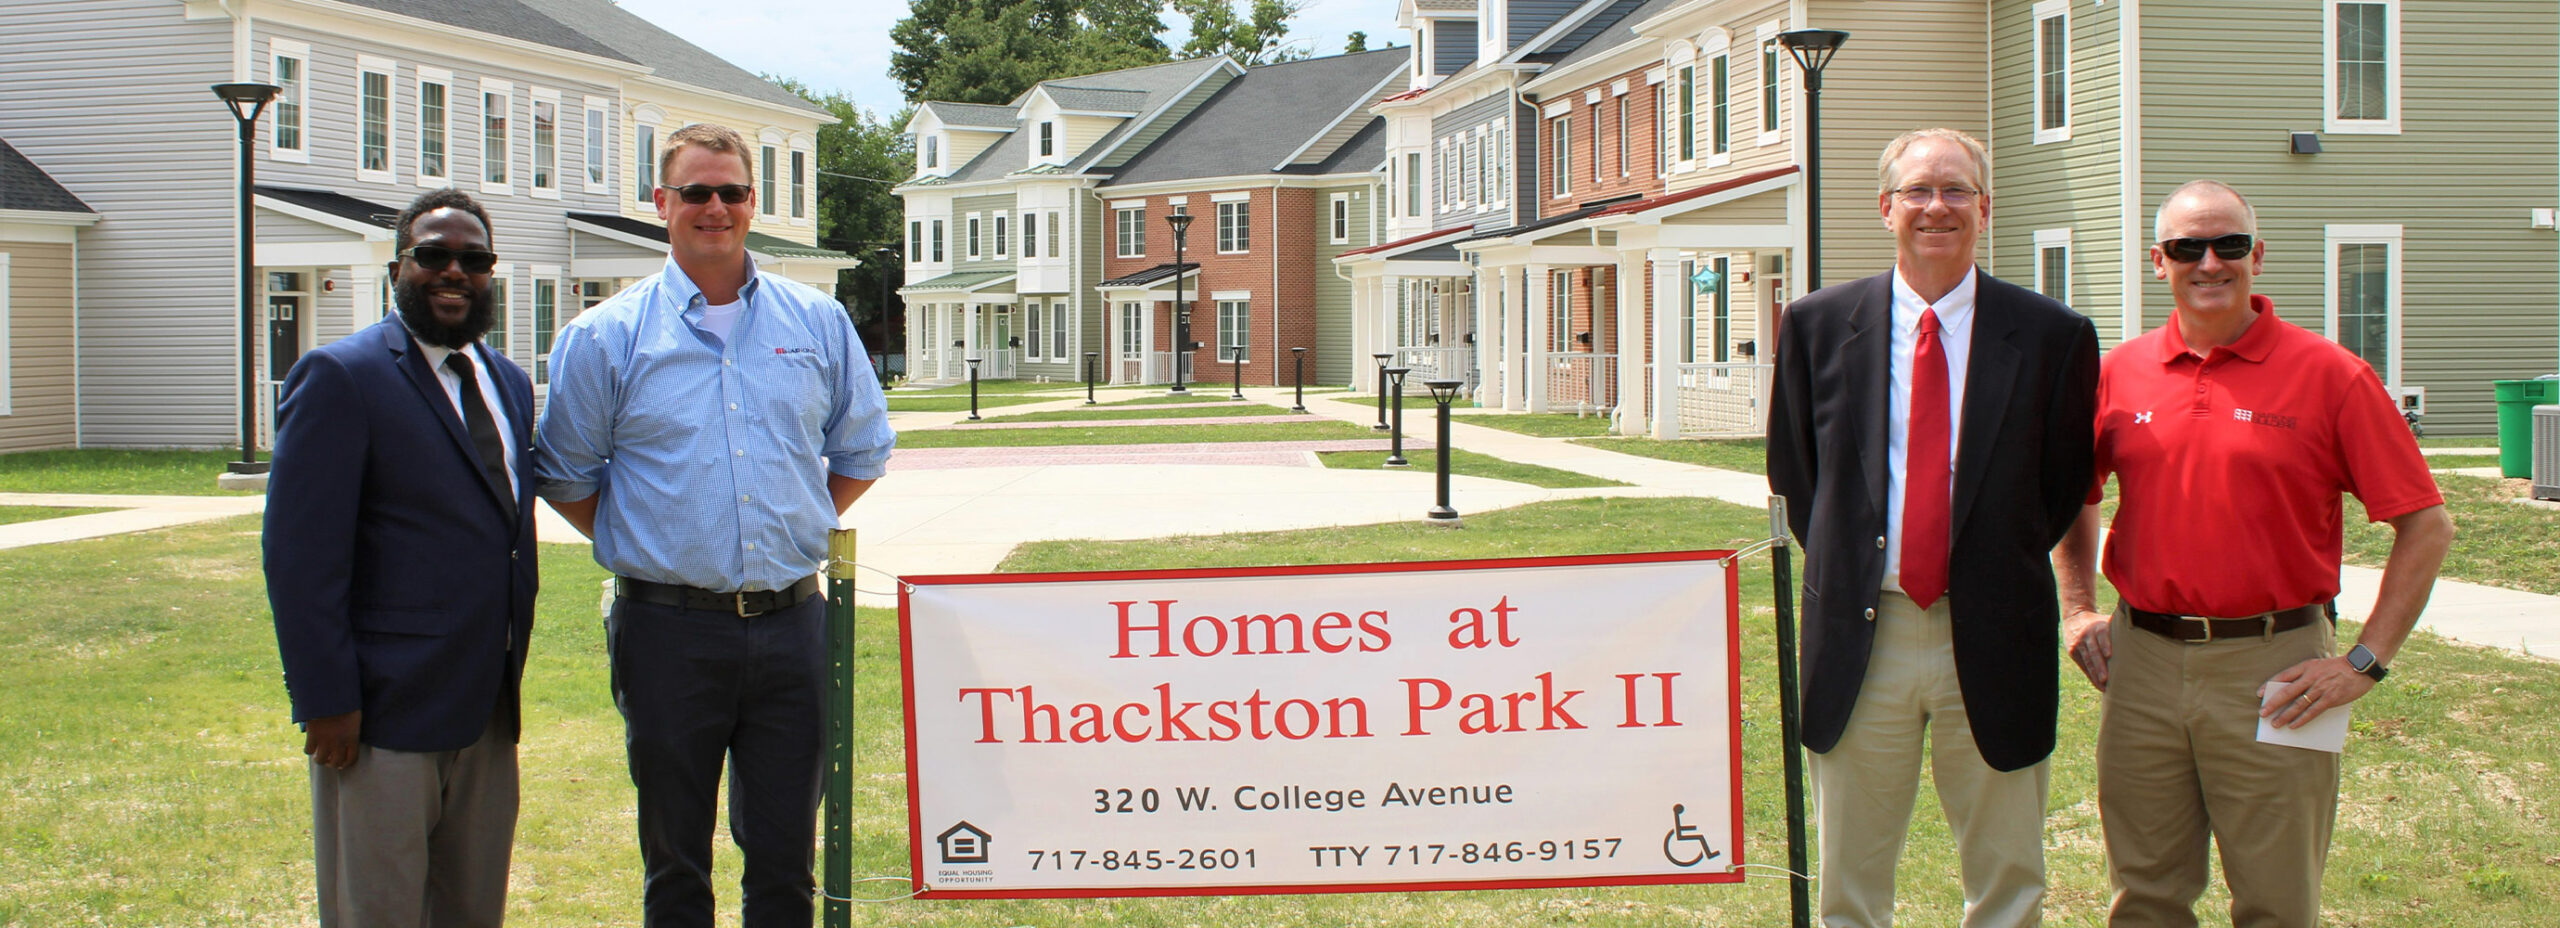 Harkins Celebrates Grand Opening of Homes at Thackston Park Phase II